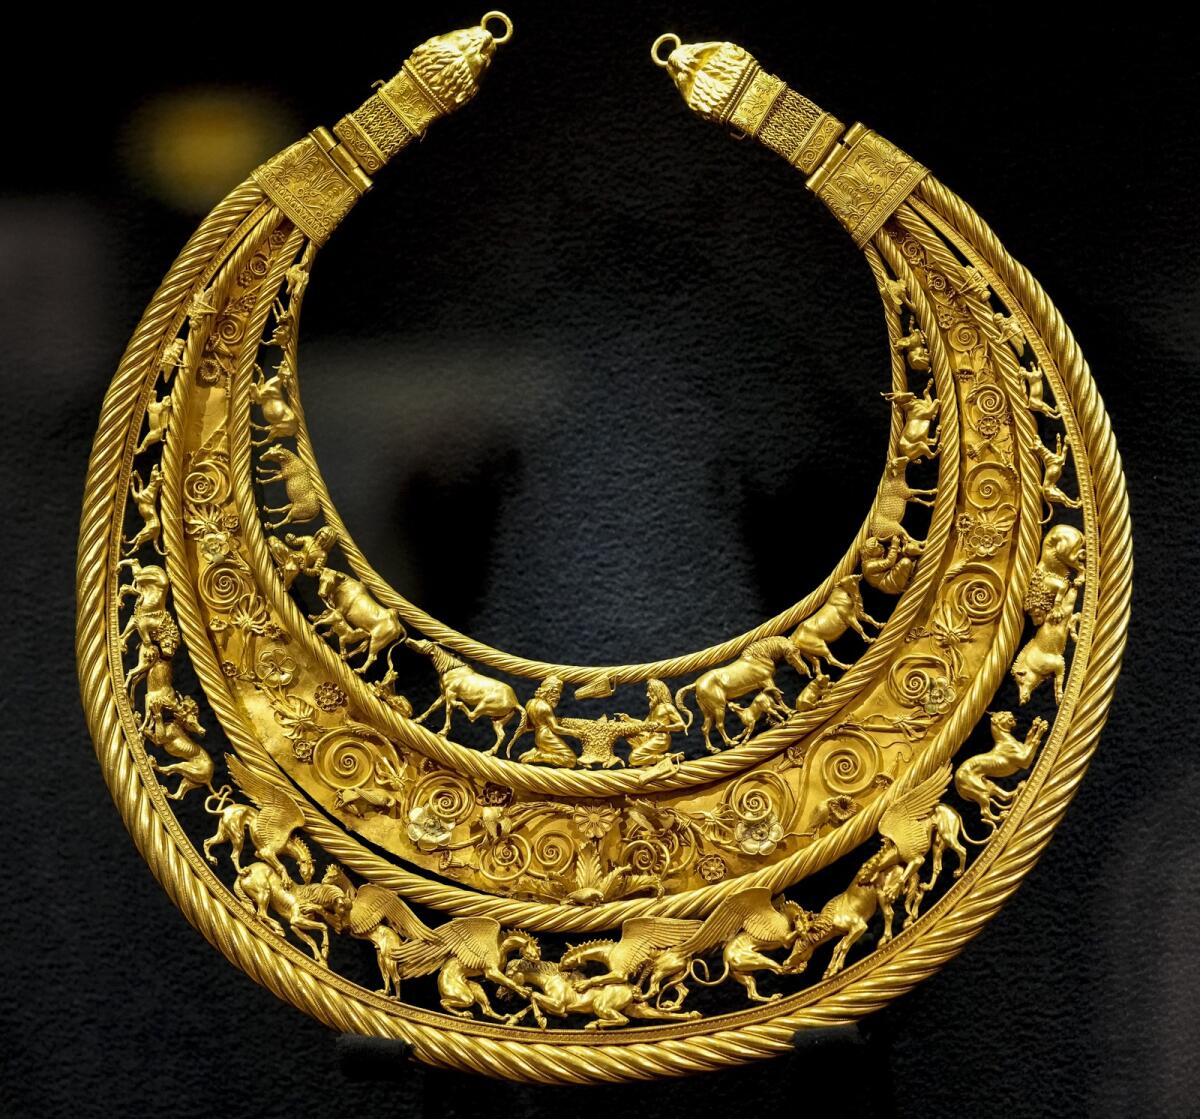 The fourth century B.C. golden pectoral, an ancient treasure from a Scythian king's burial mound, is exhibited in the Museum of Historical Treasures in Kyiv, Ukraine, on July 30, 2021. Fearing Russian troops would storm the city, museum employees dismantled exhibits, carefully packing away artifacts into boxes for evacuation. For now, the museum is just showing copies.